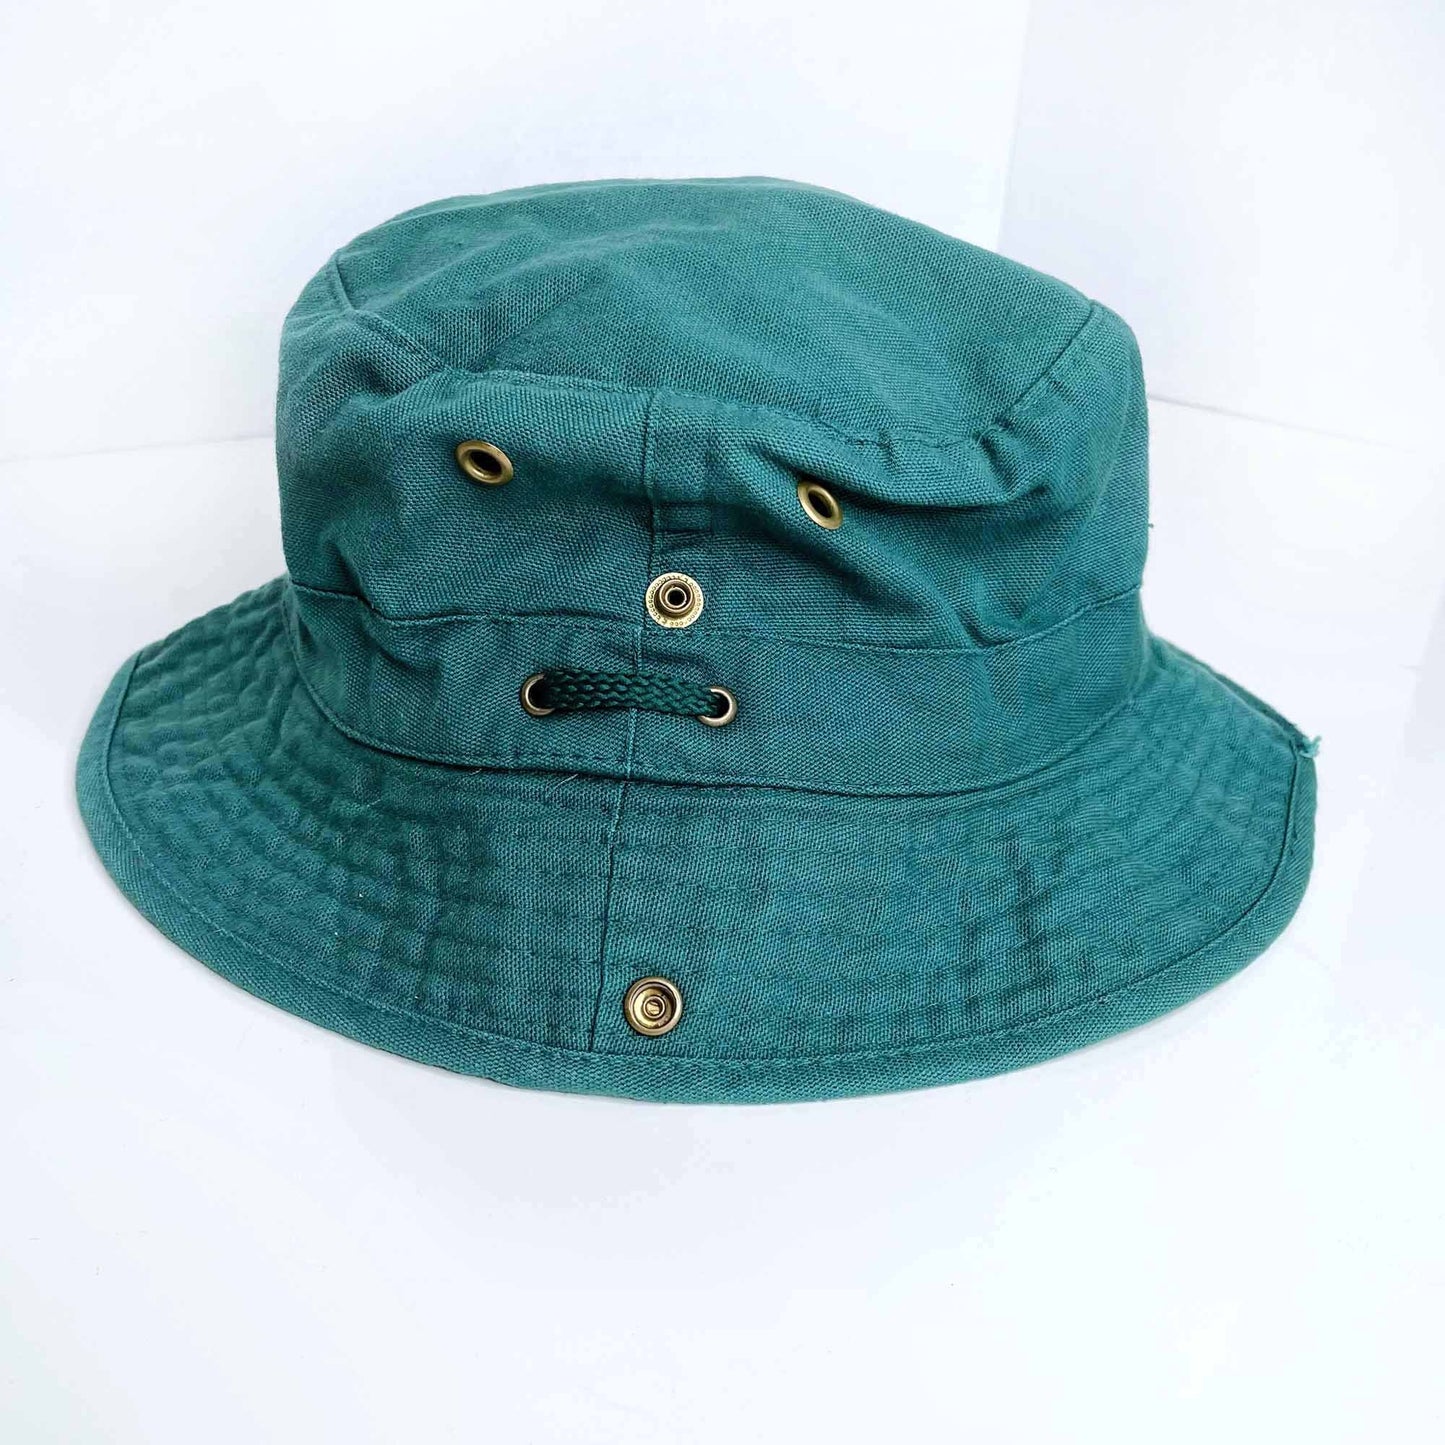 vintage kp cotton side snap outdoors bucket hat - o/s